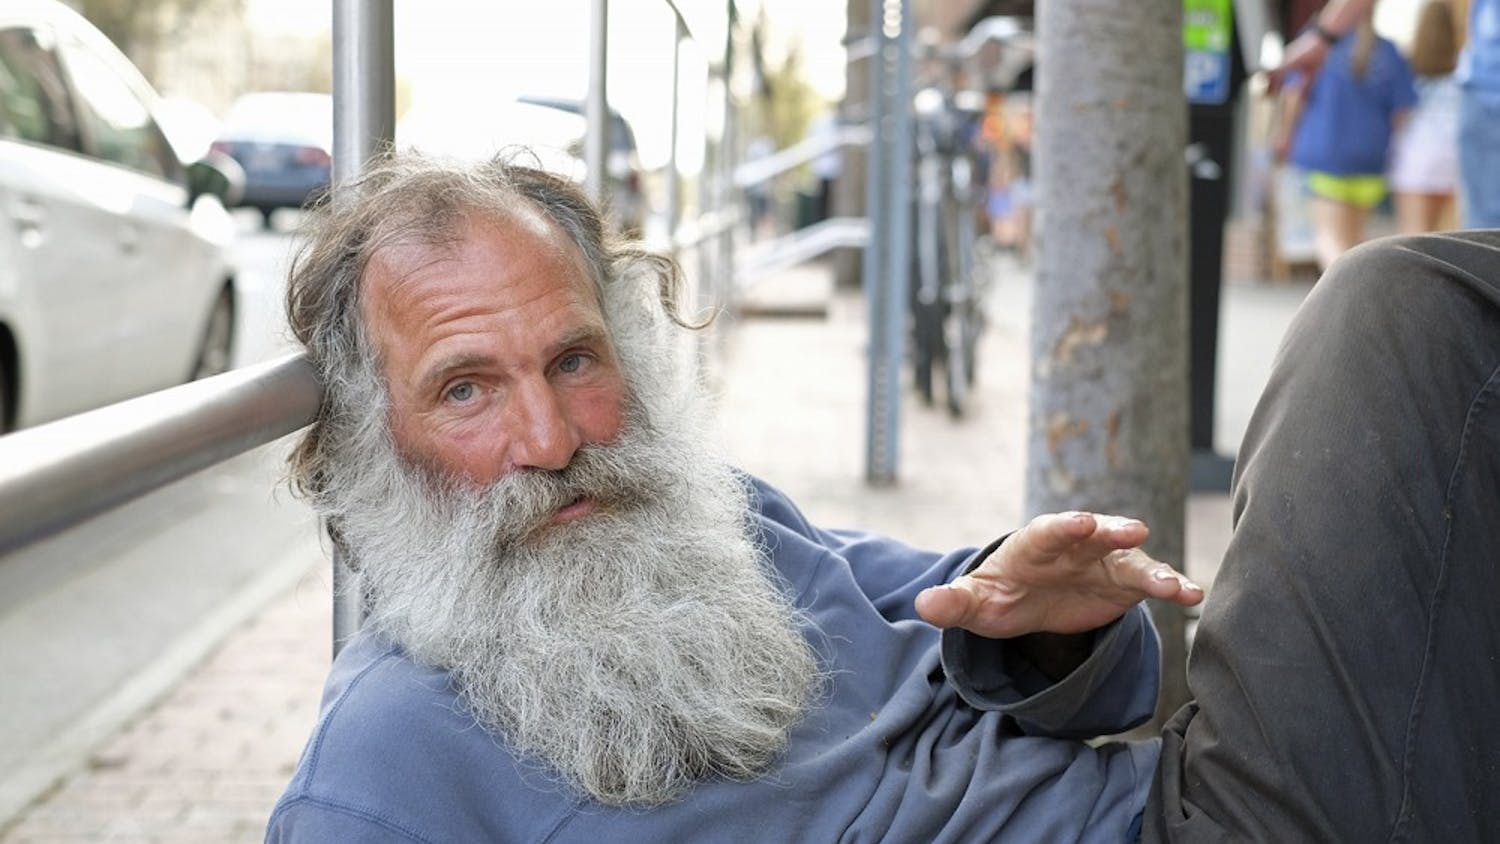 Neal, a panhandler on Franklin, sits in front of The Clothing Warehouse on April, 8 2015.